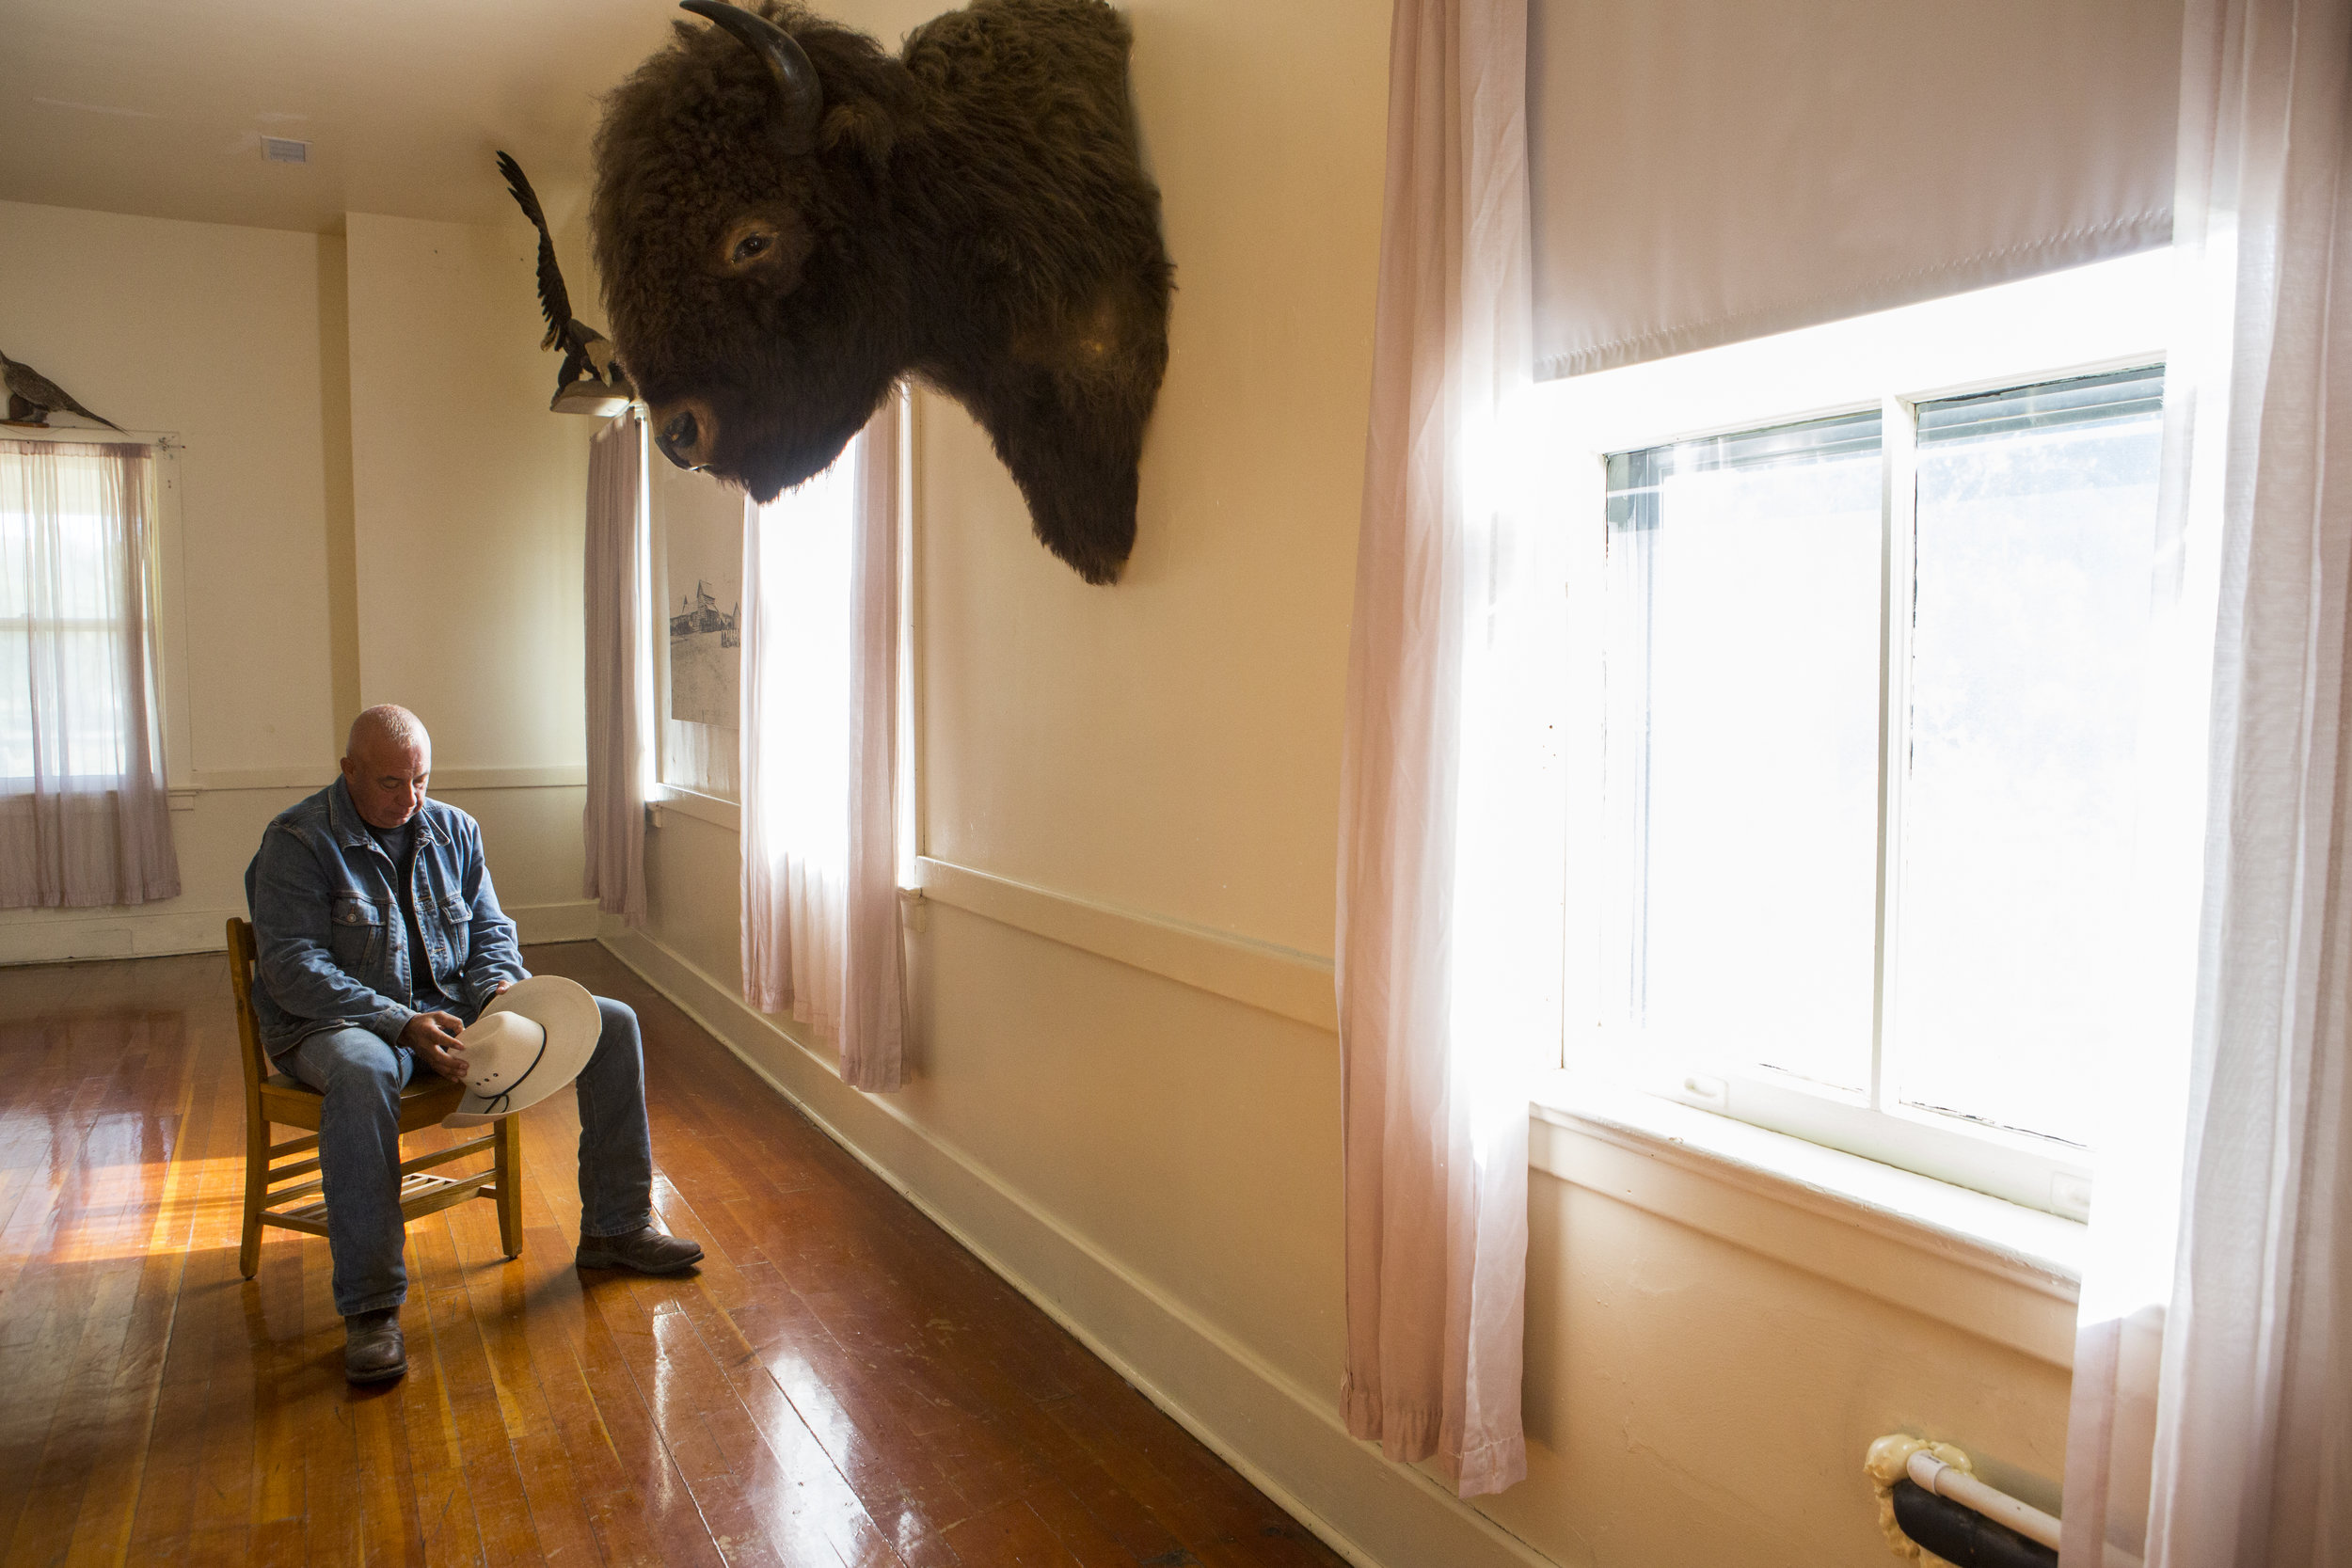  Brewer reflects during a quiet moment in the lodge at Fort Robinson. The lodge was once home to the barracks of soldiers that annihilated his people, however he has no regrets on serving the same military.&nbsp;“The Lakota spirit is a warrior spirit